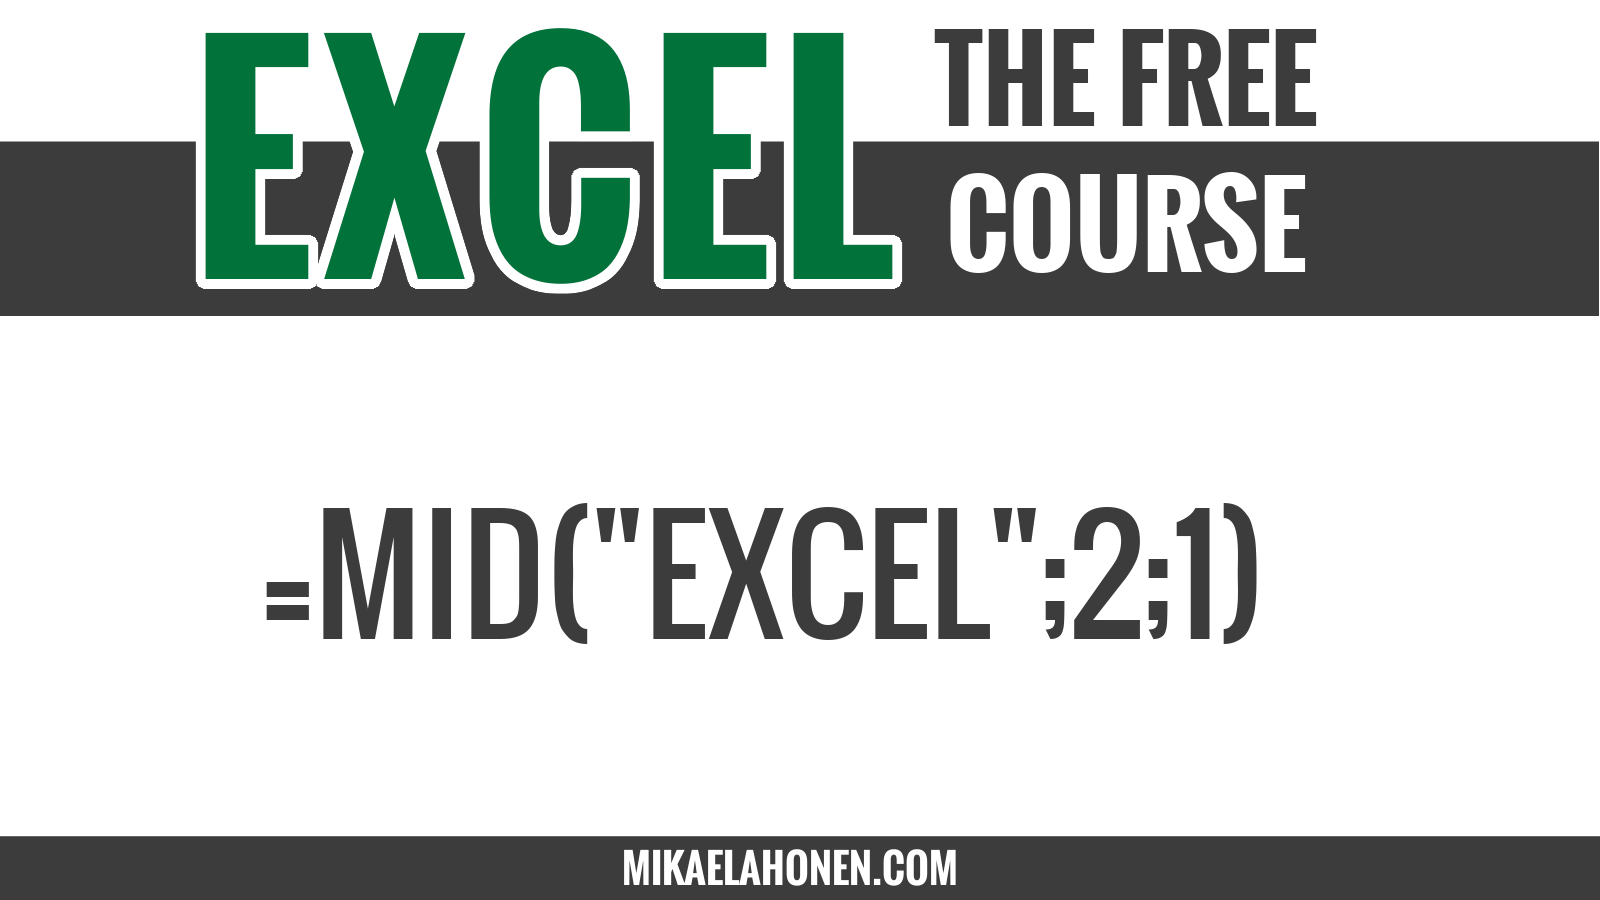 Text formulas advanced functions excel